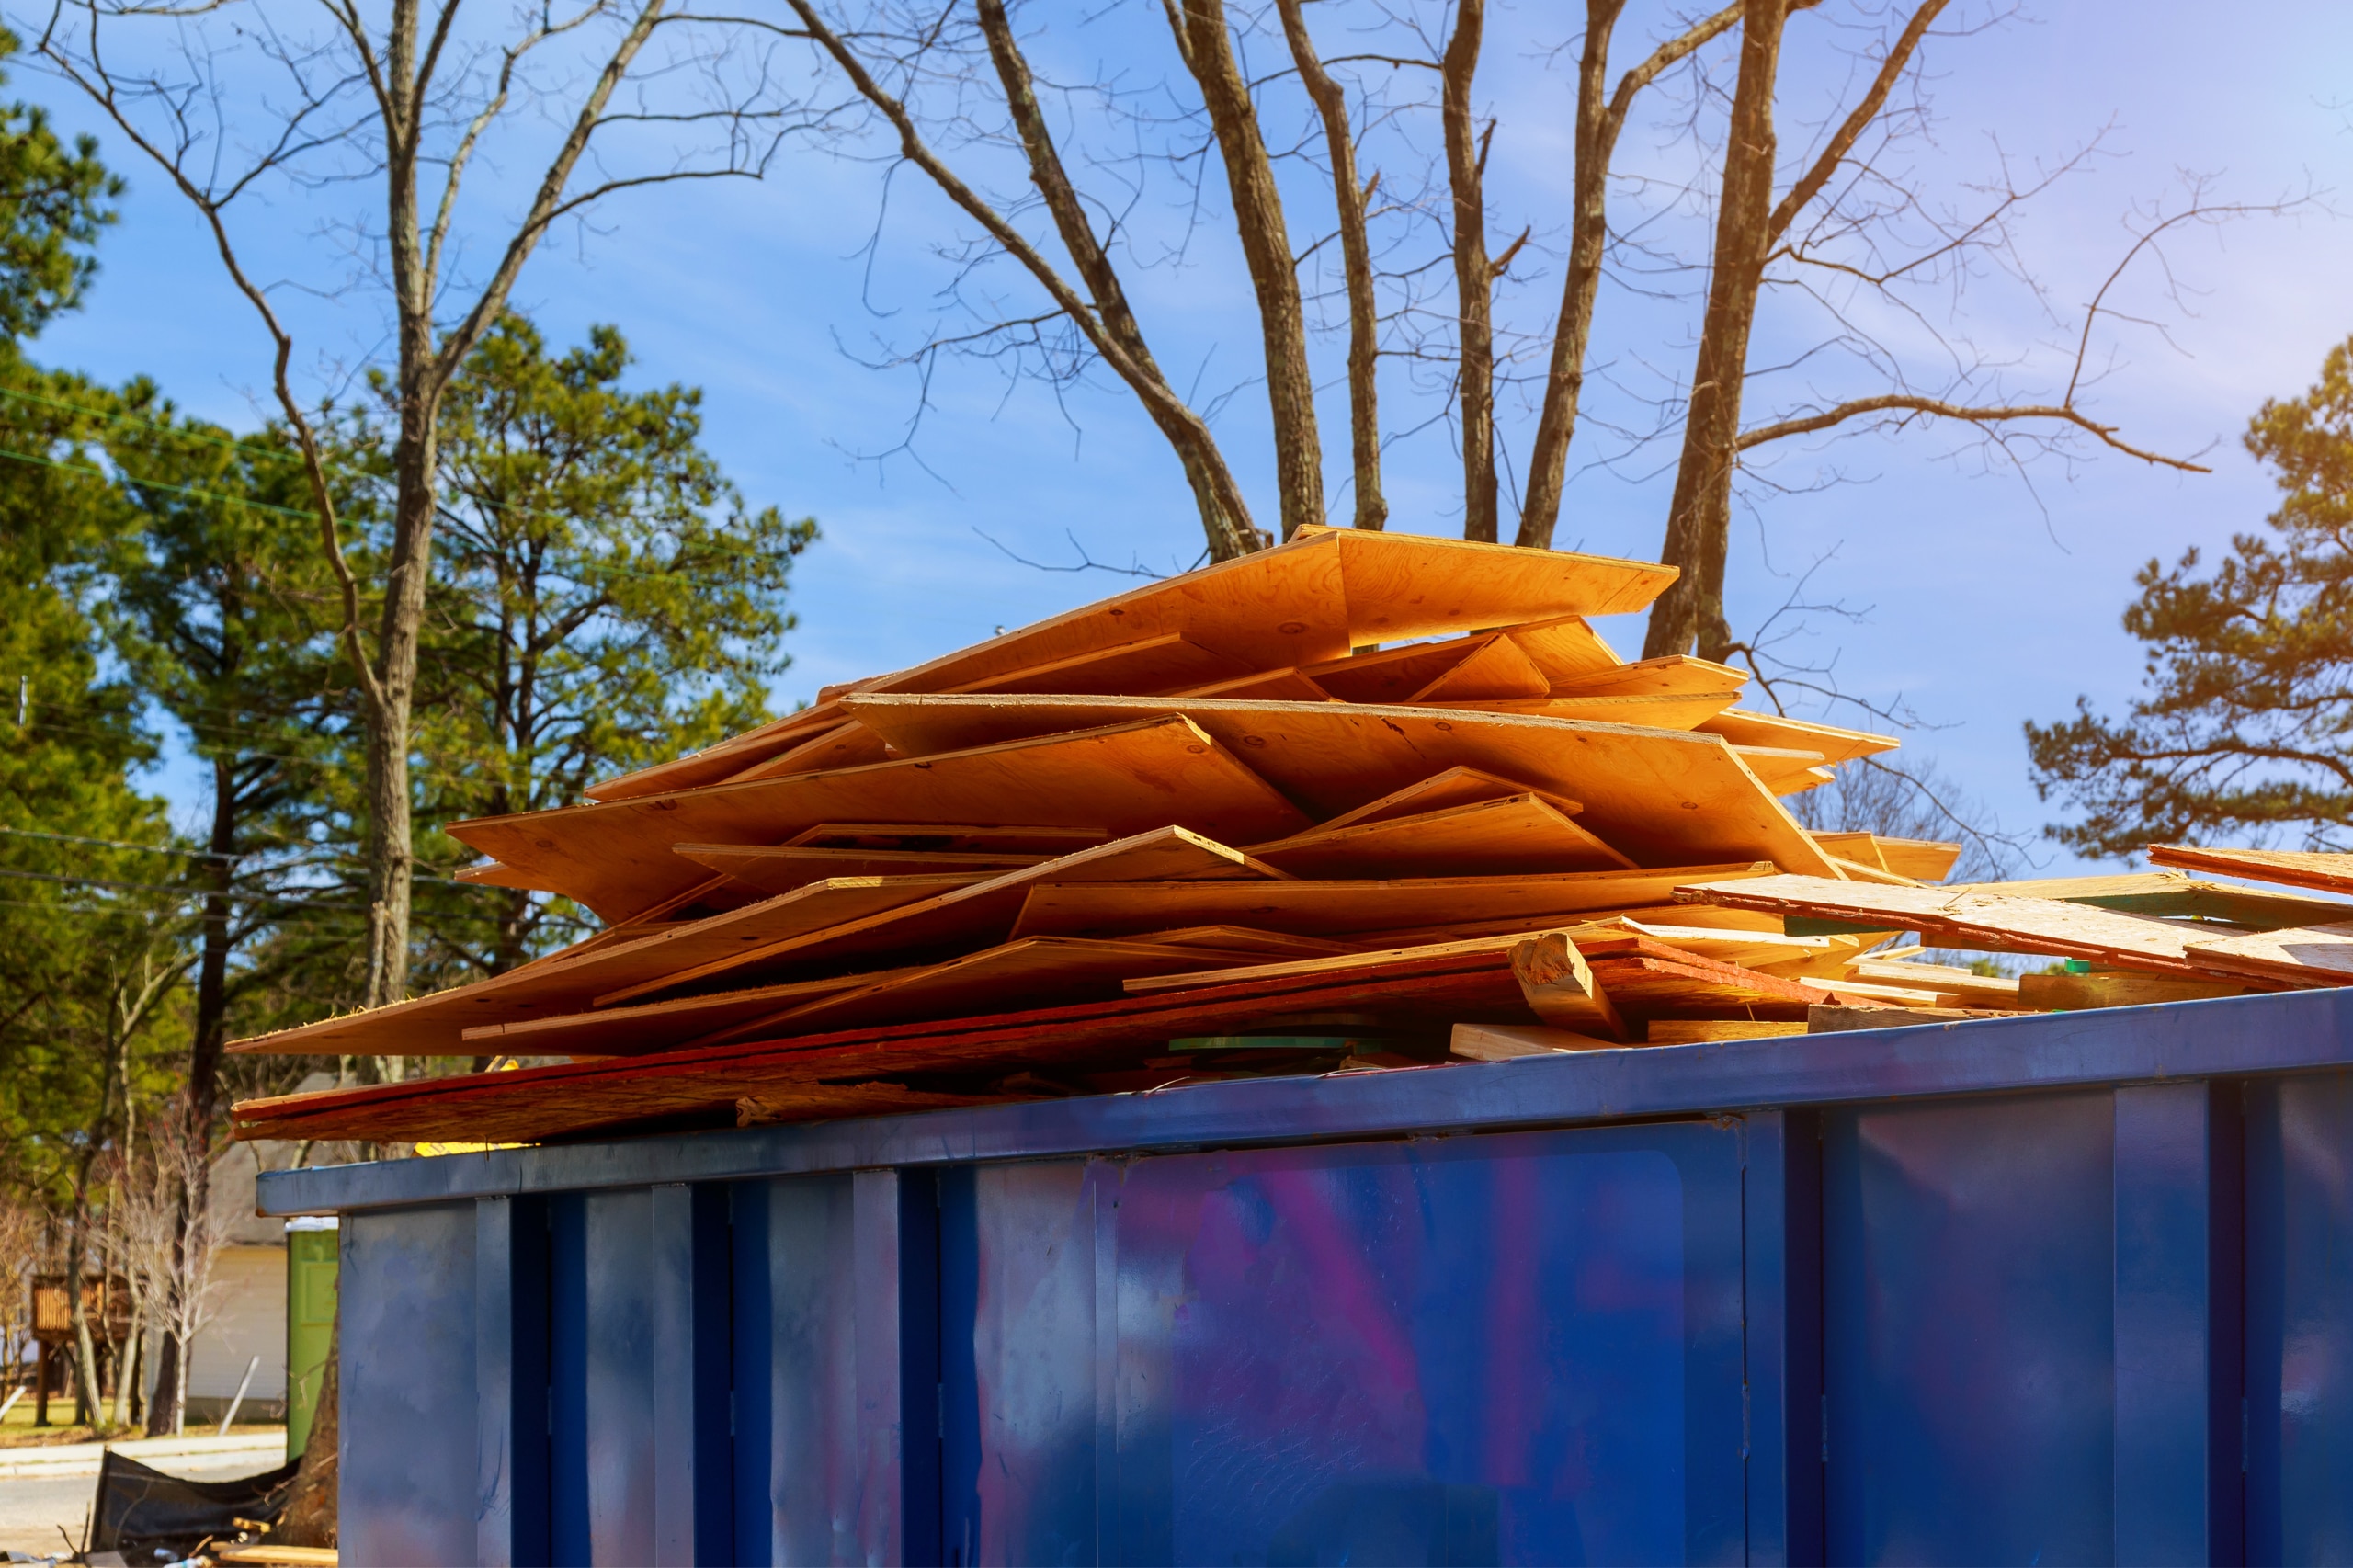 What You Need To Know About Renting a Dumpster